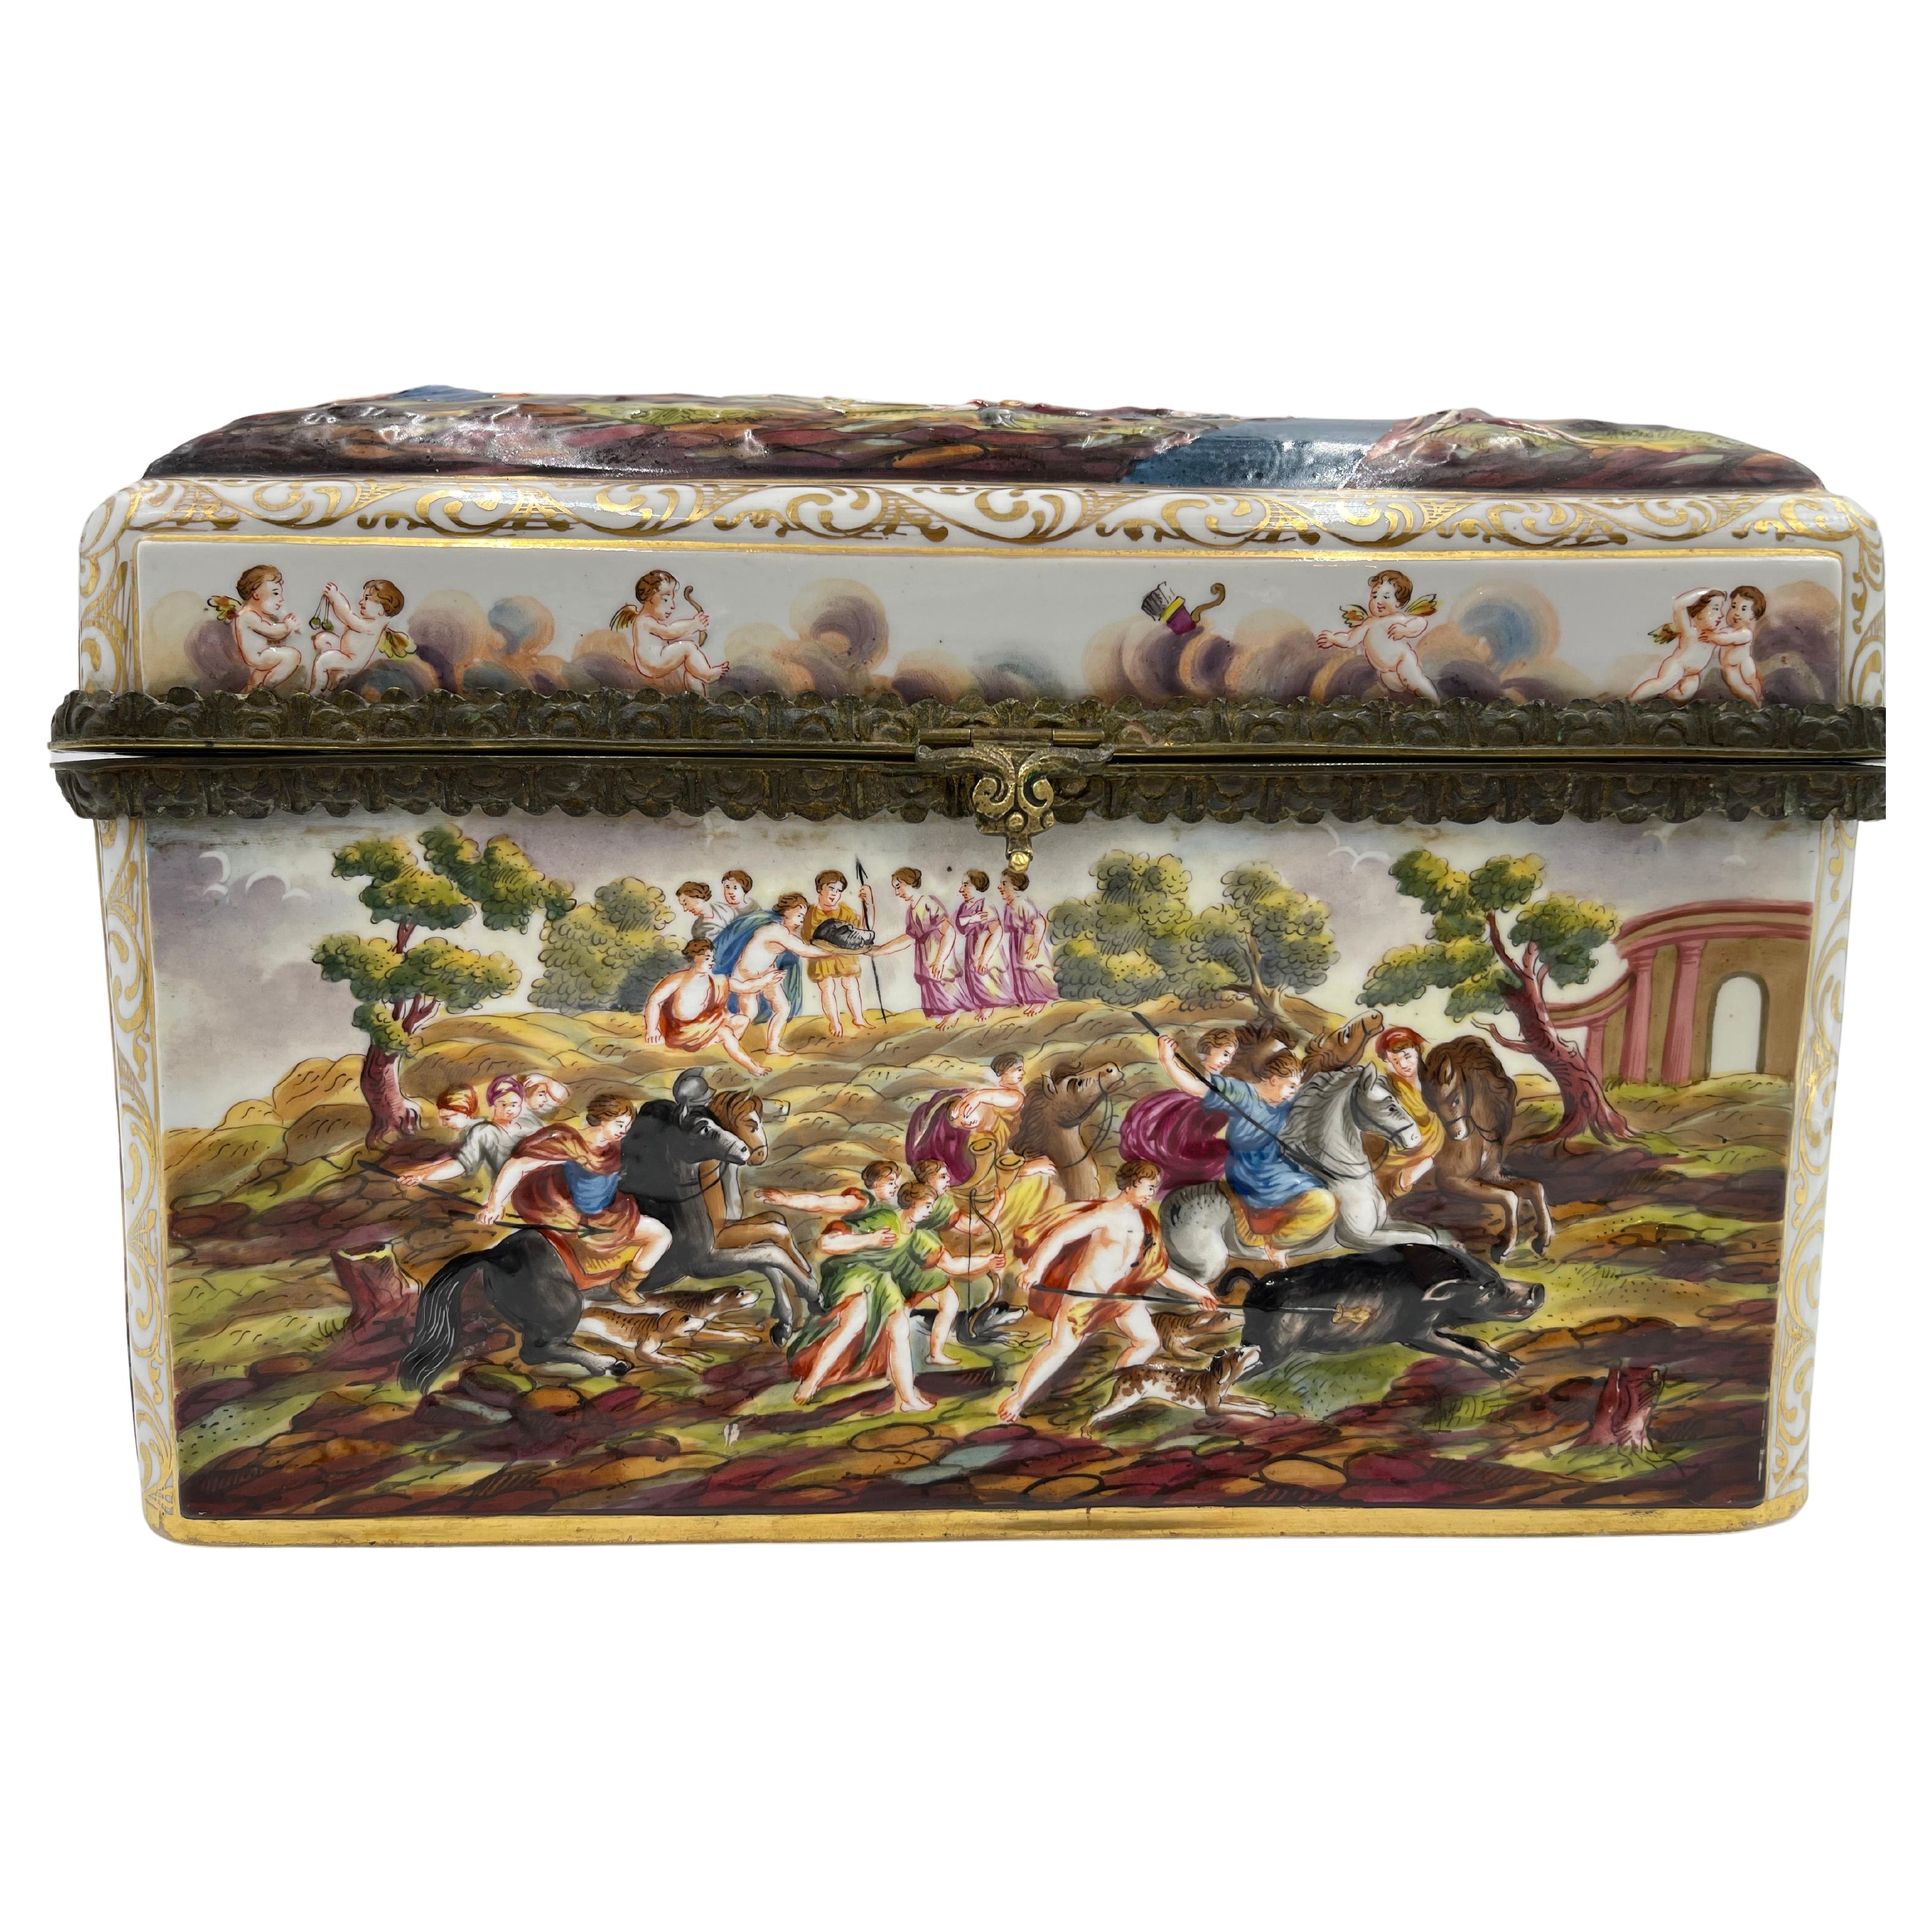 Spectacular large Capodimonte porcelain table casket/box, late 19th, and decorated with polychrome and gilt relief molded panels decorated with mythological scenes. Ormolu/gilt metal mounts. Crowned 